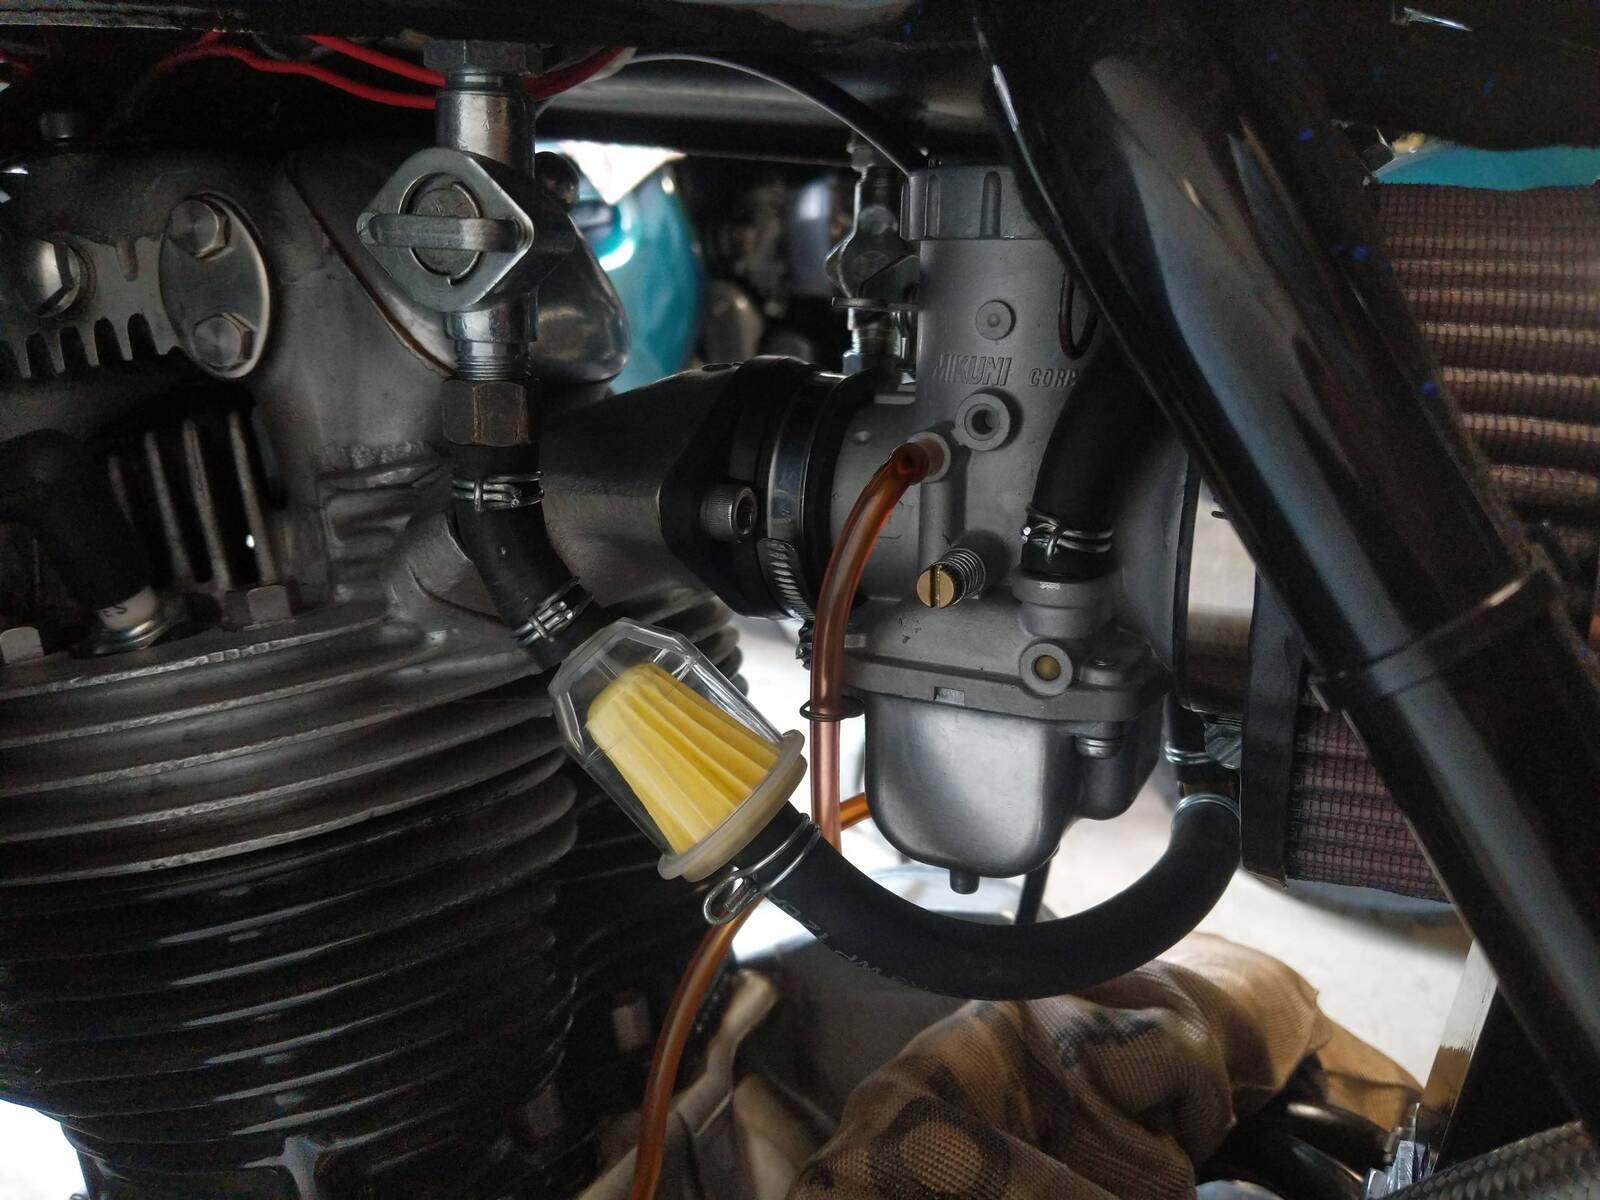 Fuel lines with a Mikuni  How to run them?